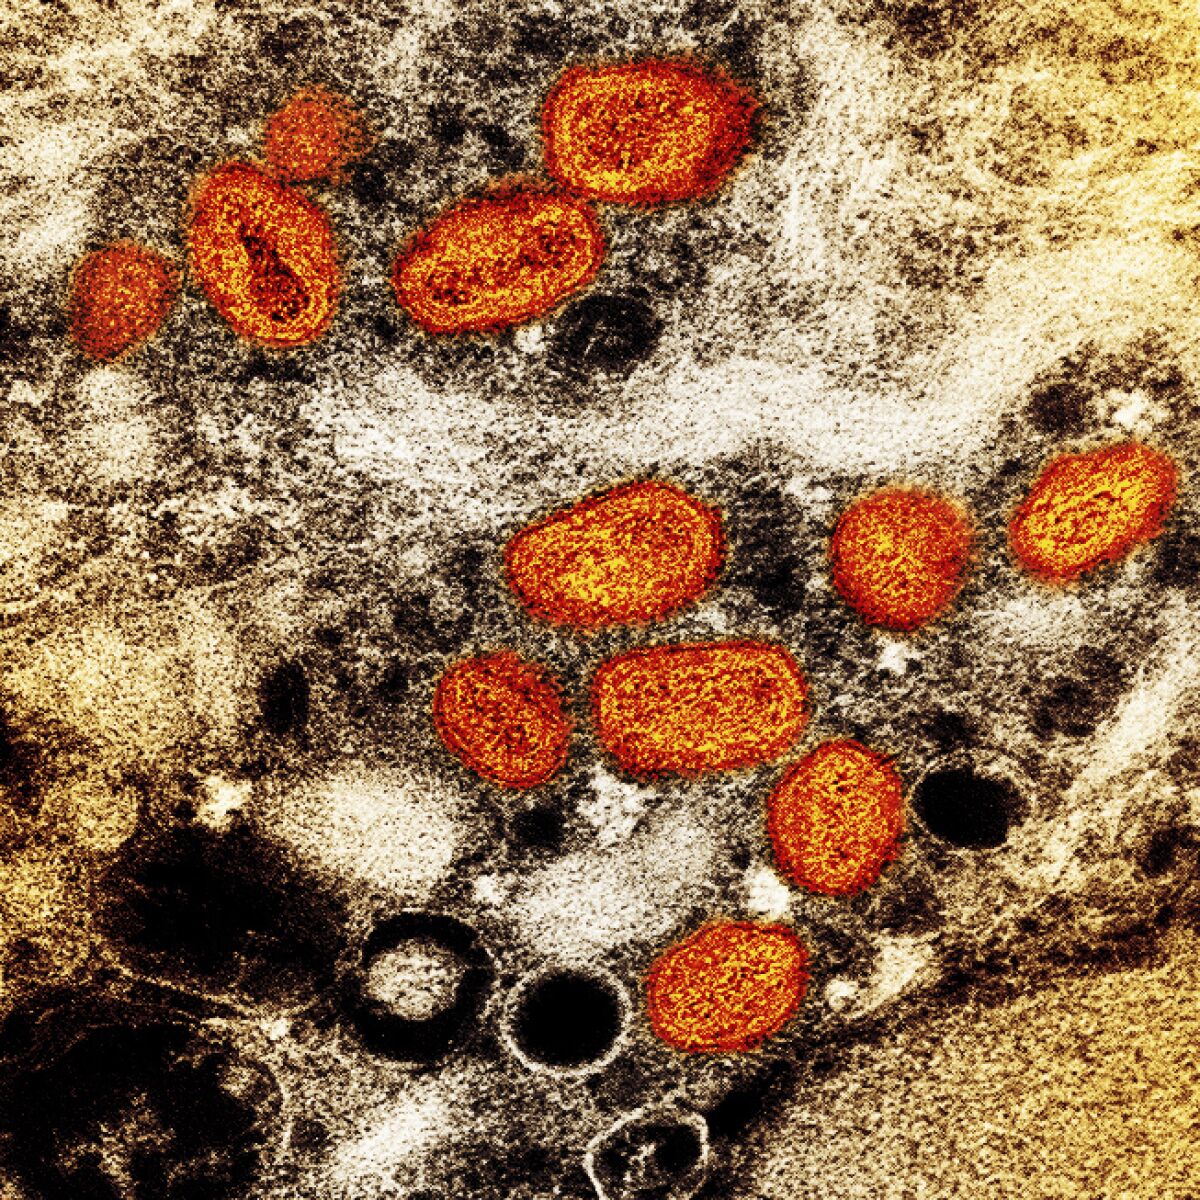 A colorized electron micrograph of monkeypox particles (orange) within an infected cell (brown)